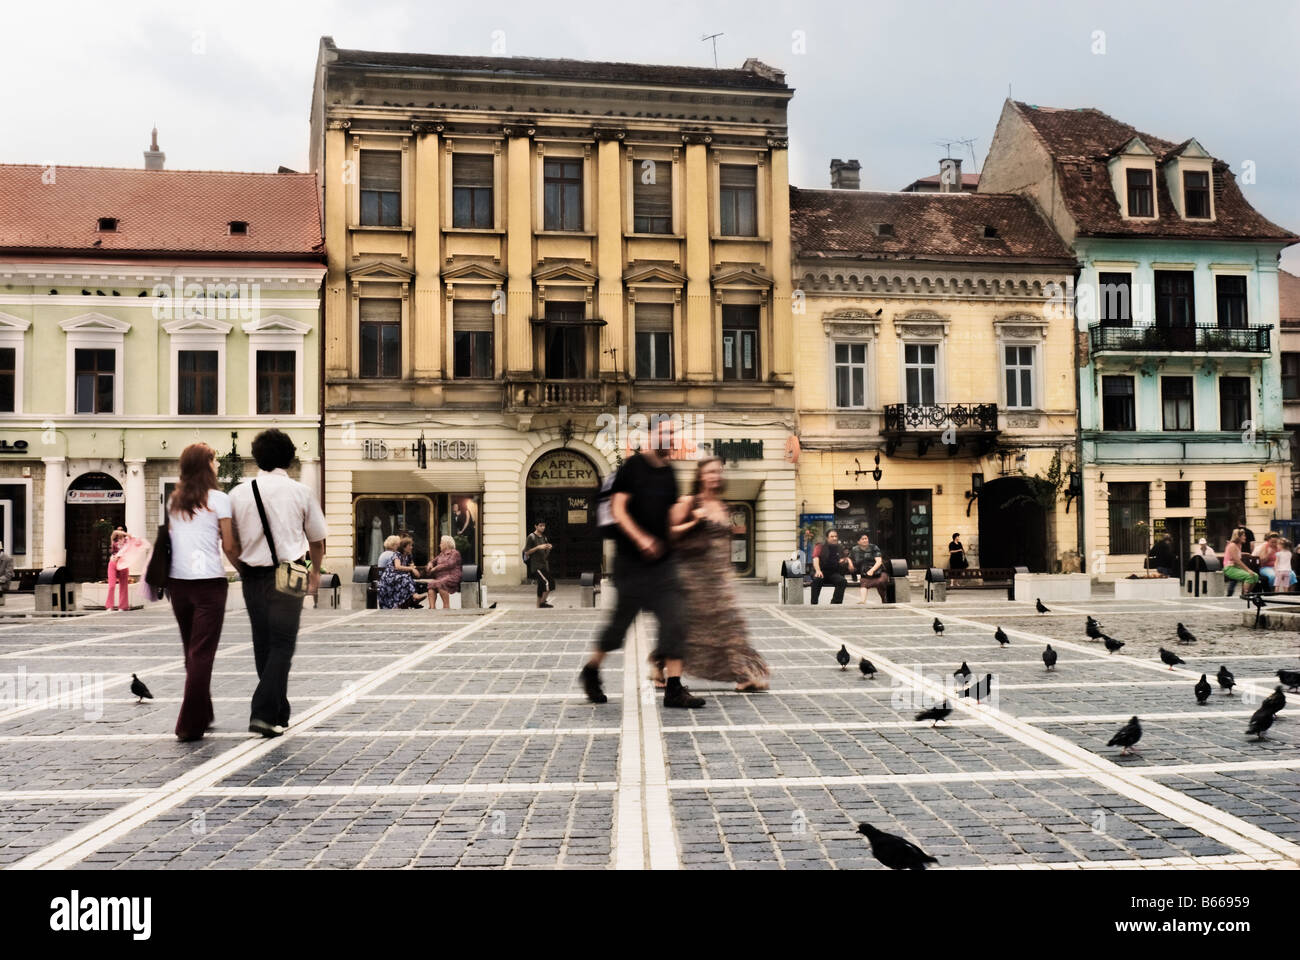 Tourists and locals relax in Pata stafalui main town square Brasov Romania Stock Photo